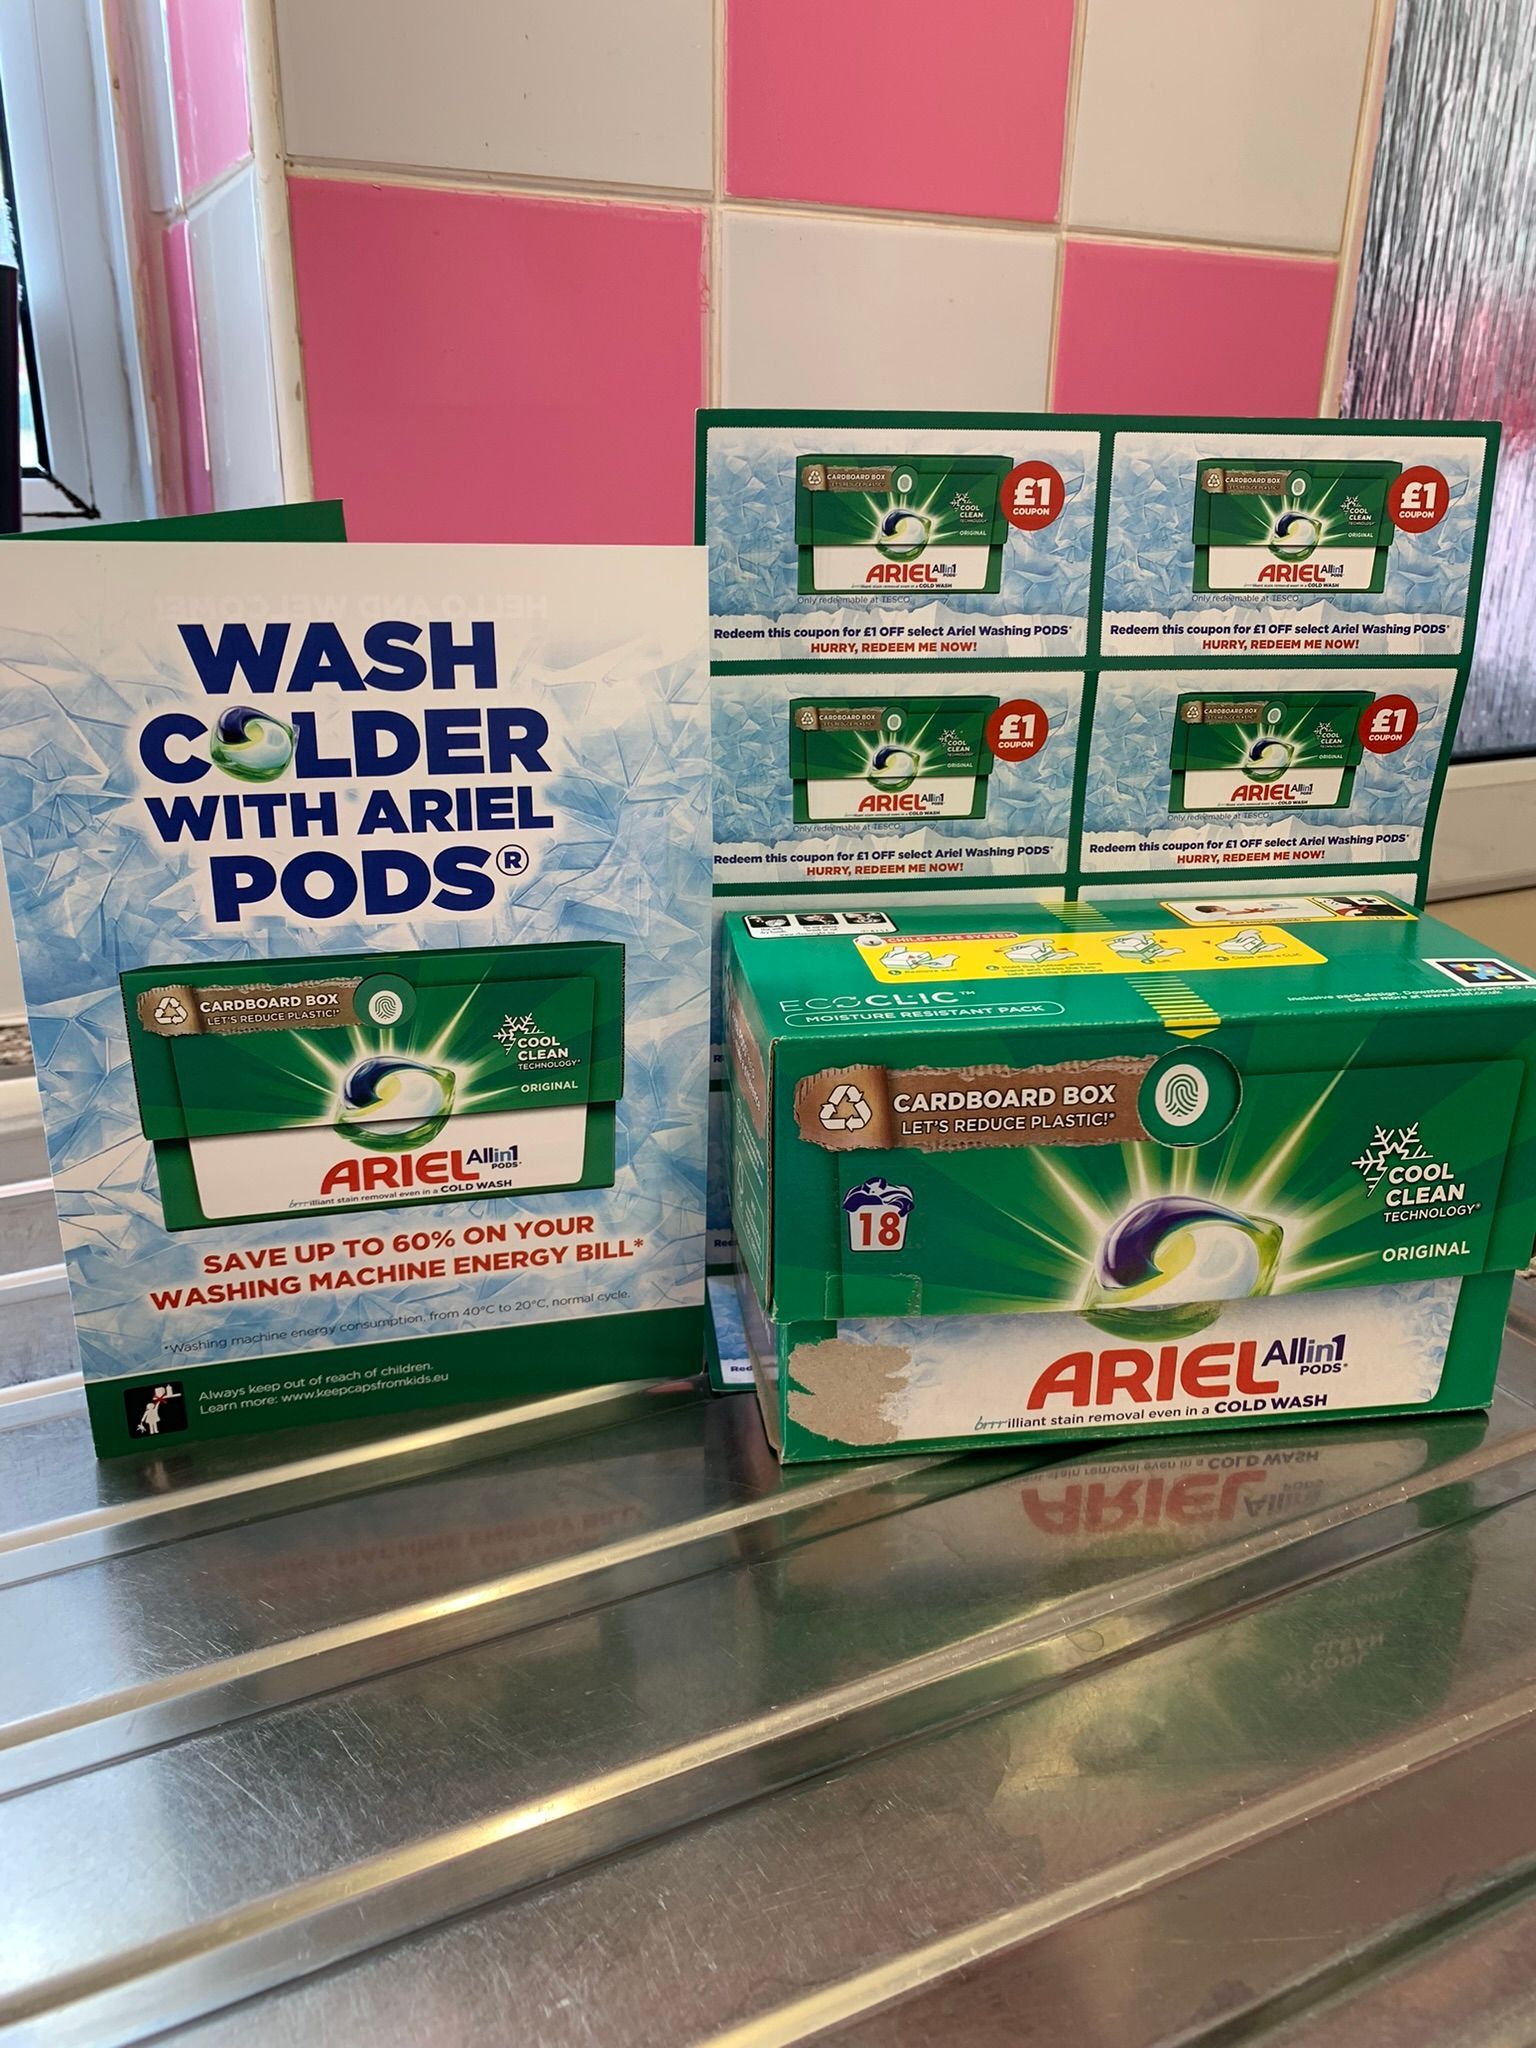 Box of ariel washing tablets in a cardboard box  with a leaflet stood up next to it say wash colder with ariel pods save upto 60% on your washing machine energy bill. Behind the ariel box is some cupons for £1 off your next box. All of these products are stood on a silver draining board with pink and white tiles in the background.